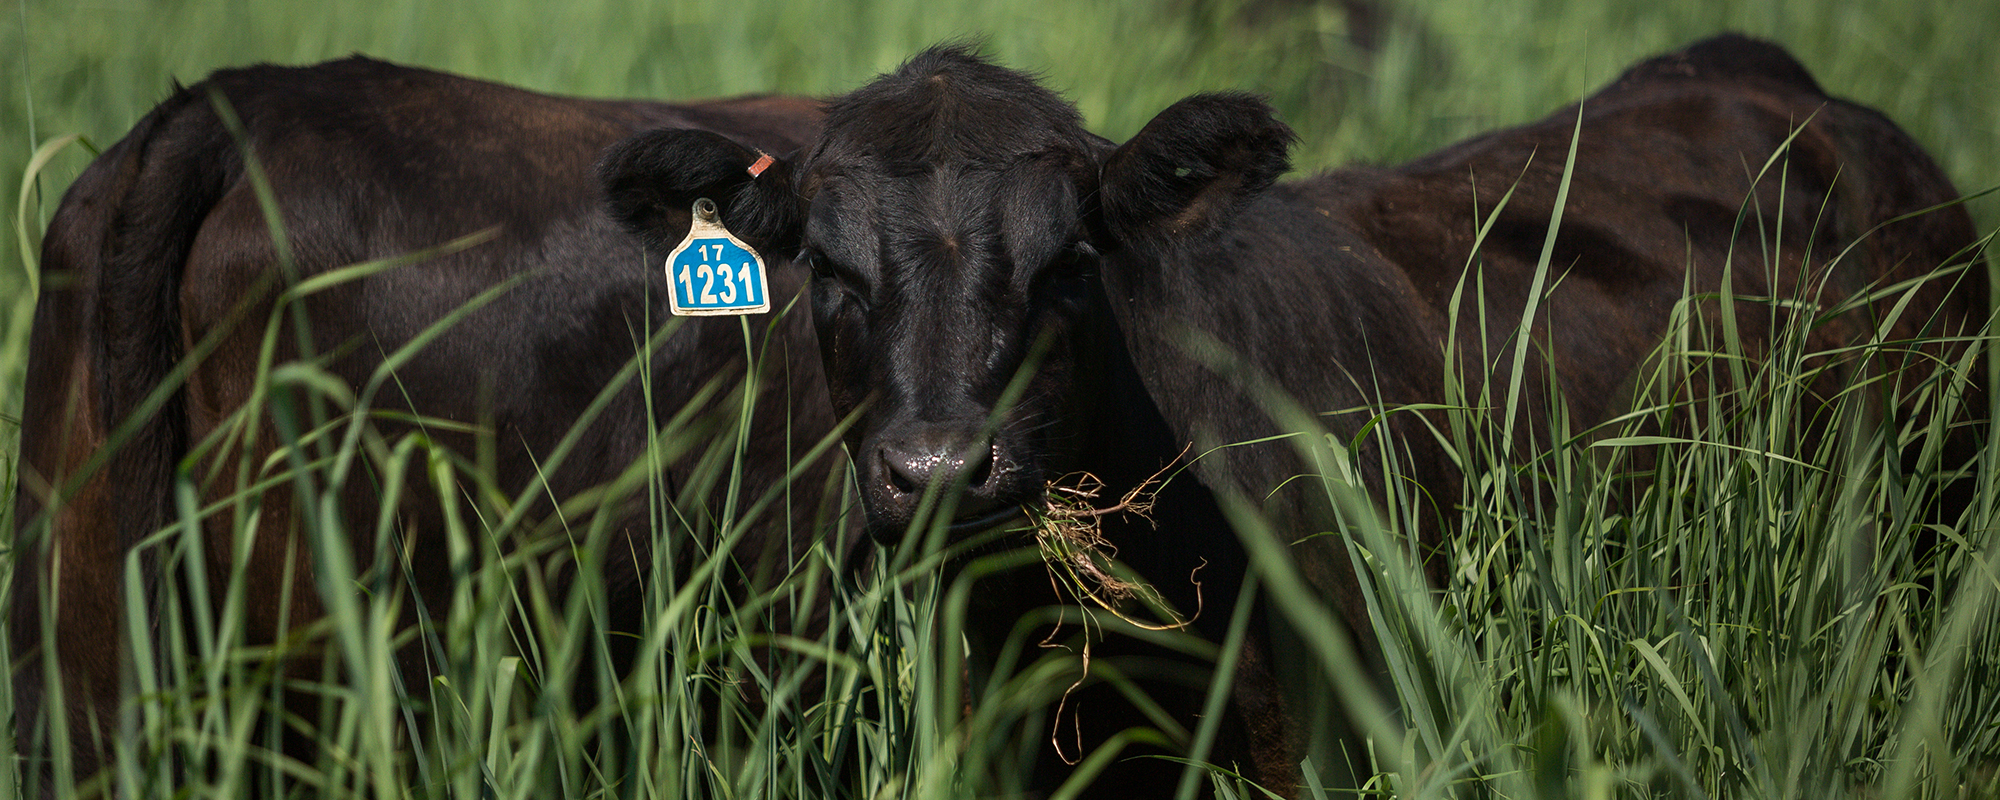 Adapting Forage Supply and Stocking Rates Ahead of La Niña: Strategies for Resilient Ranching